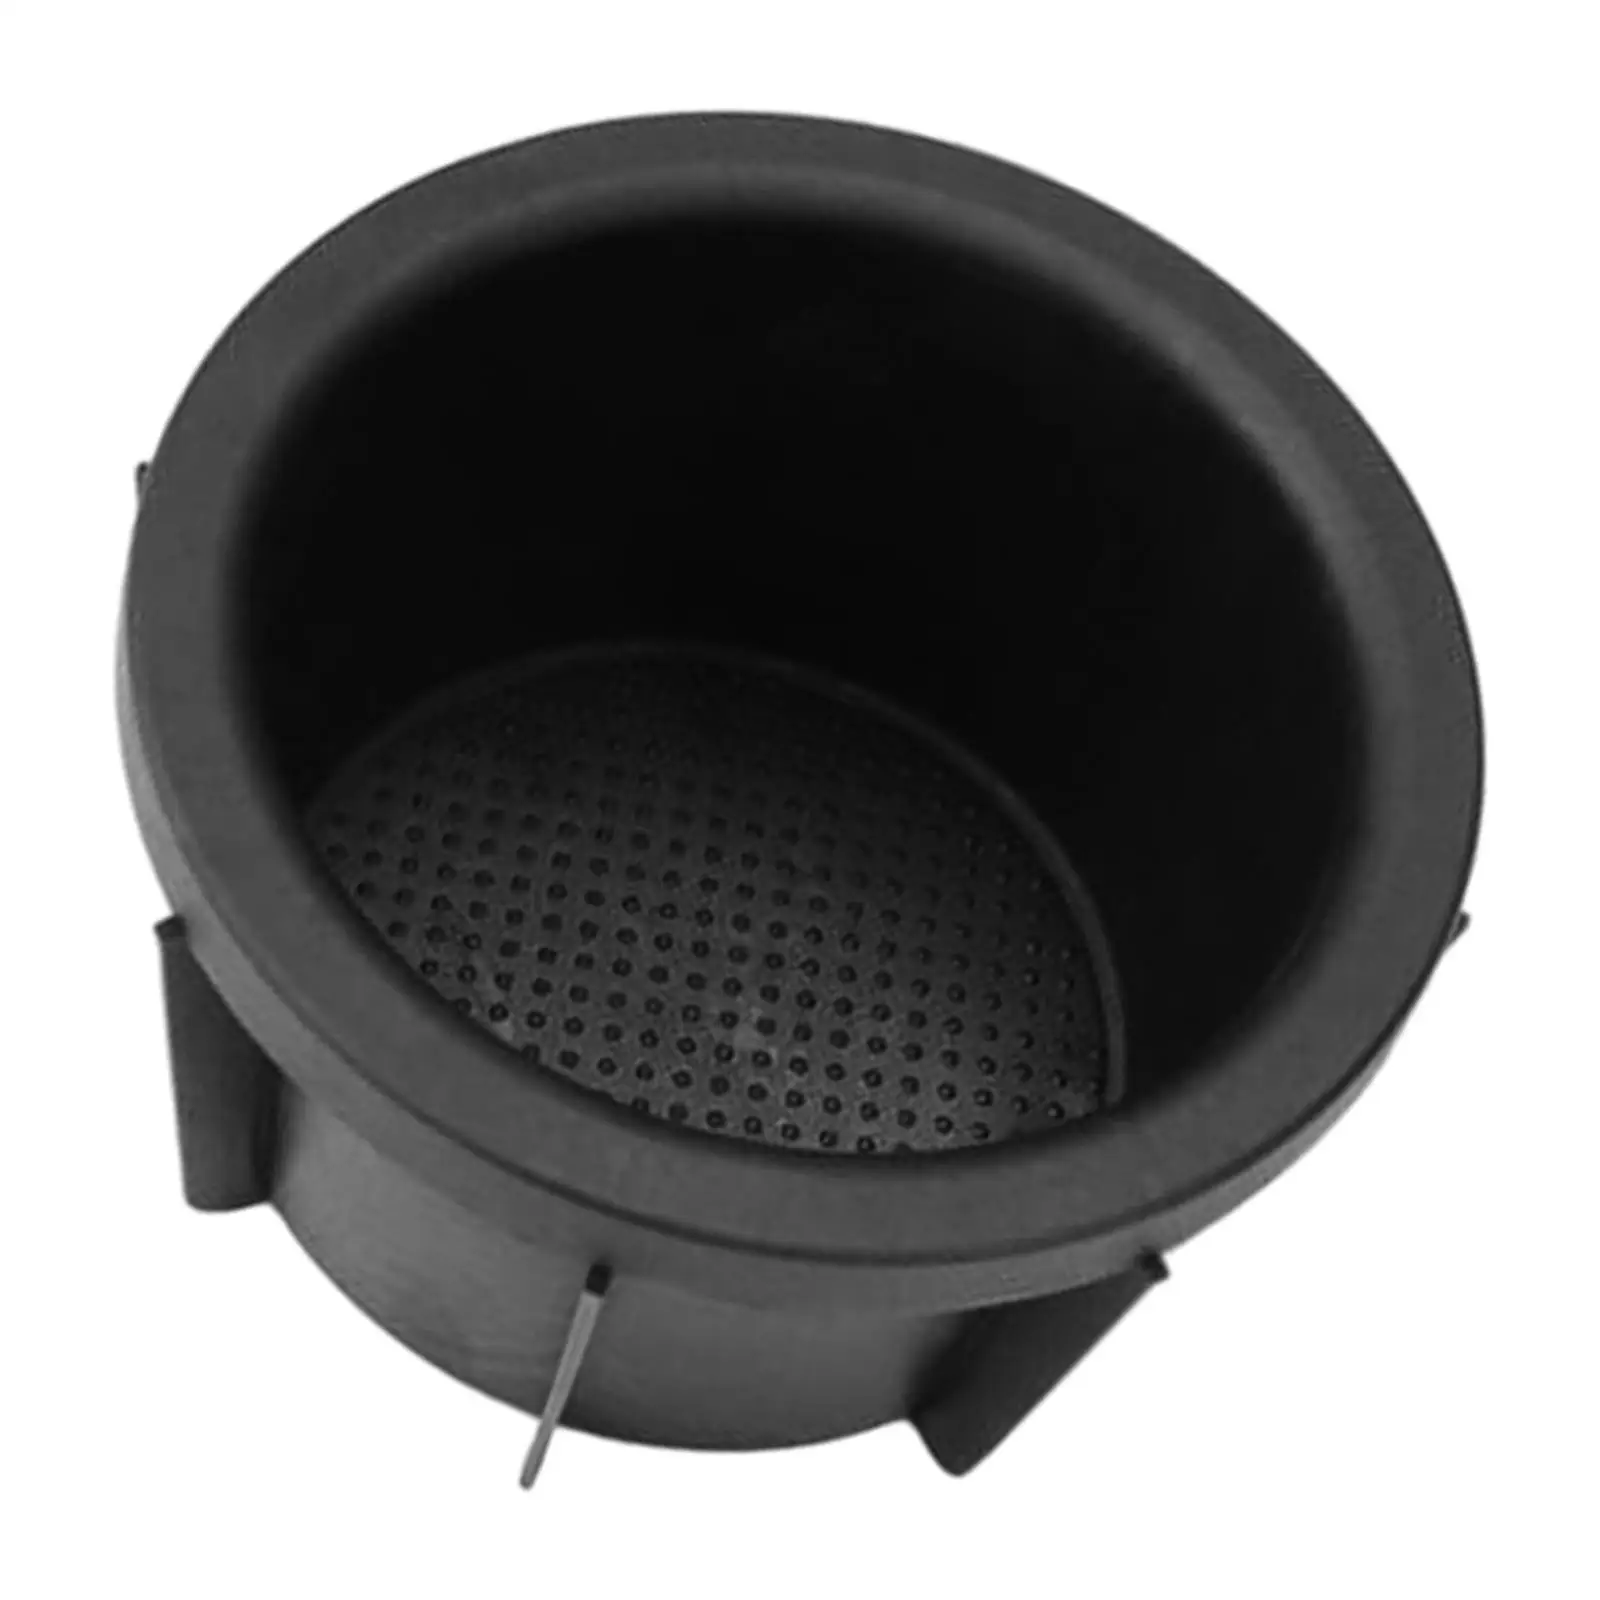 Center Console Cup Holder 5561842040 Easy to Use Small Size Drinks Holders Fits for   2006-2012 Replacement Black